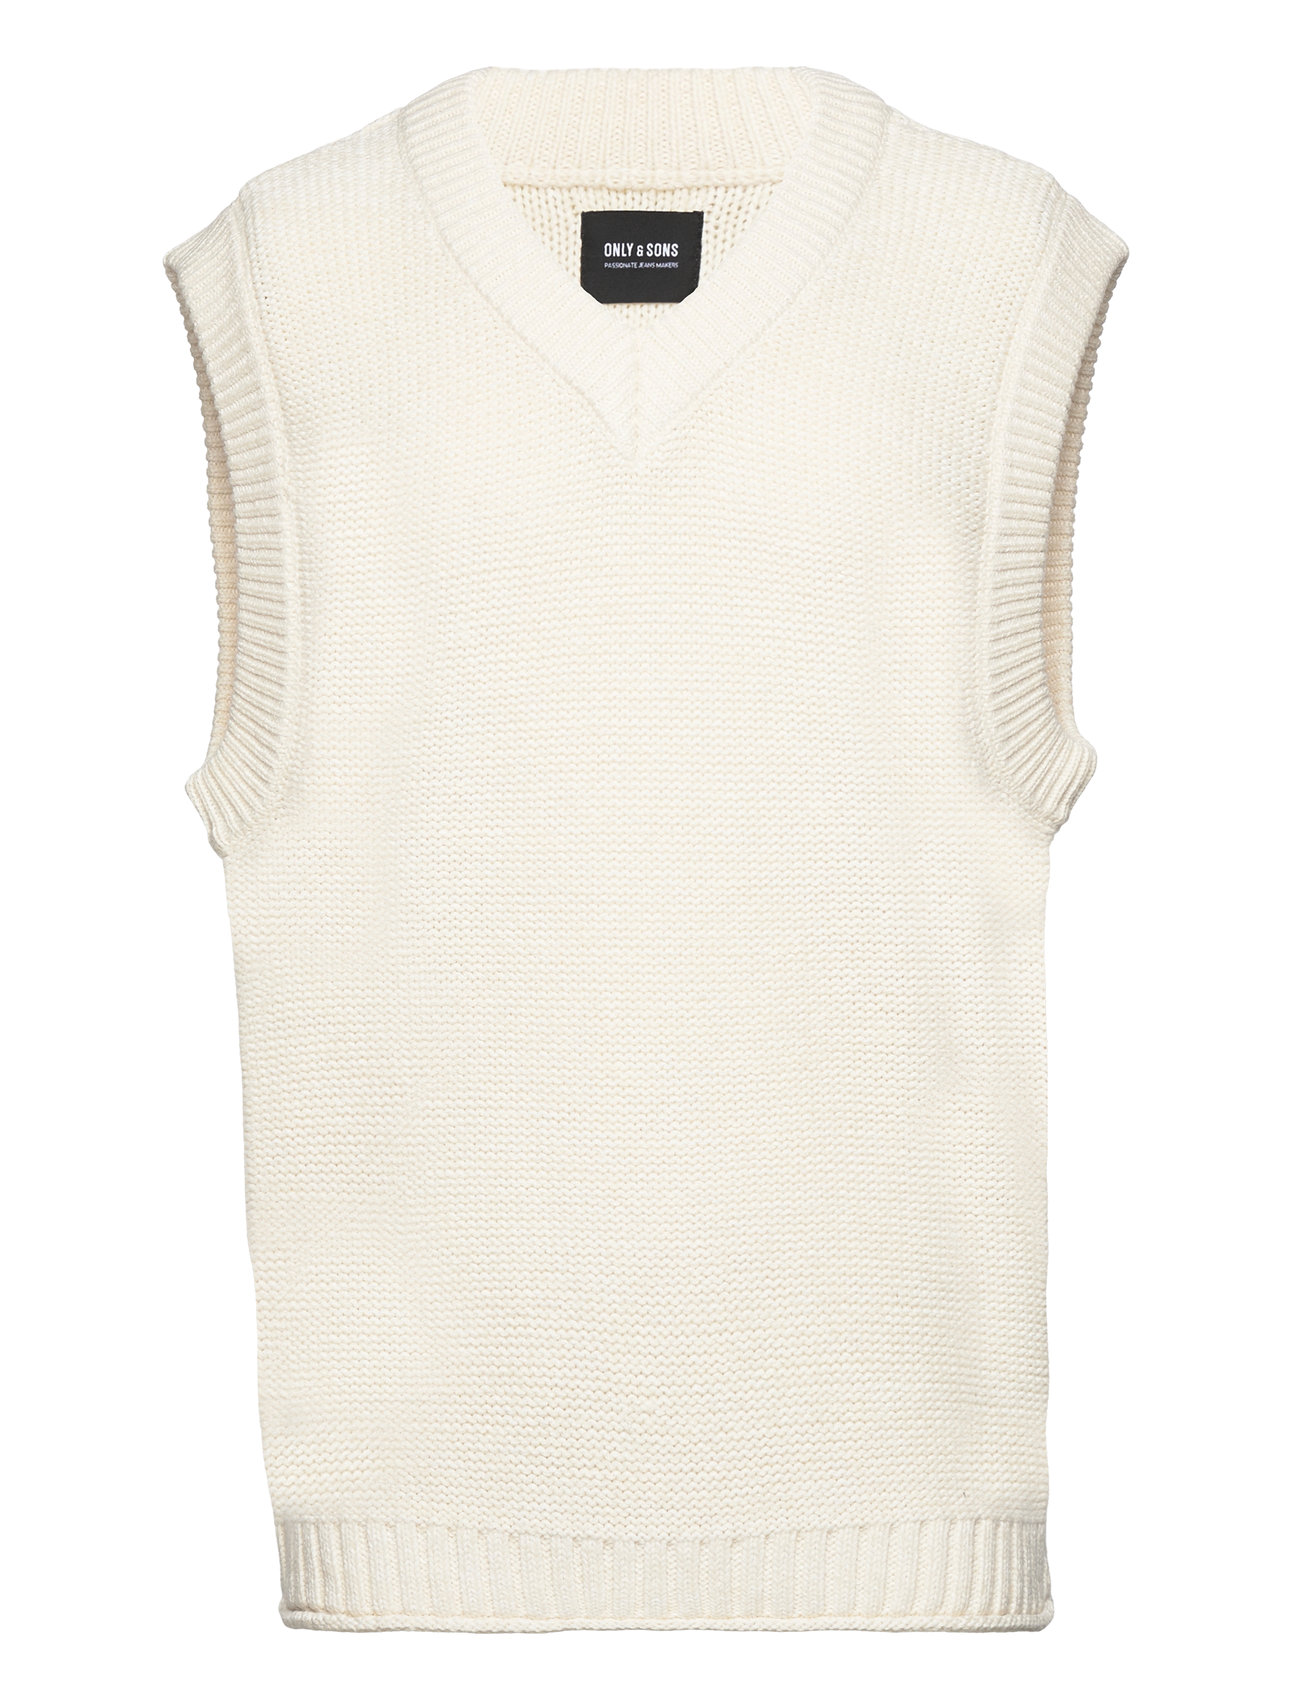 Onskasper Life Rlx 3 Solid Vest Knit Tops Knitwear Knitted Vests White ONLY & SONS